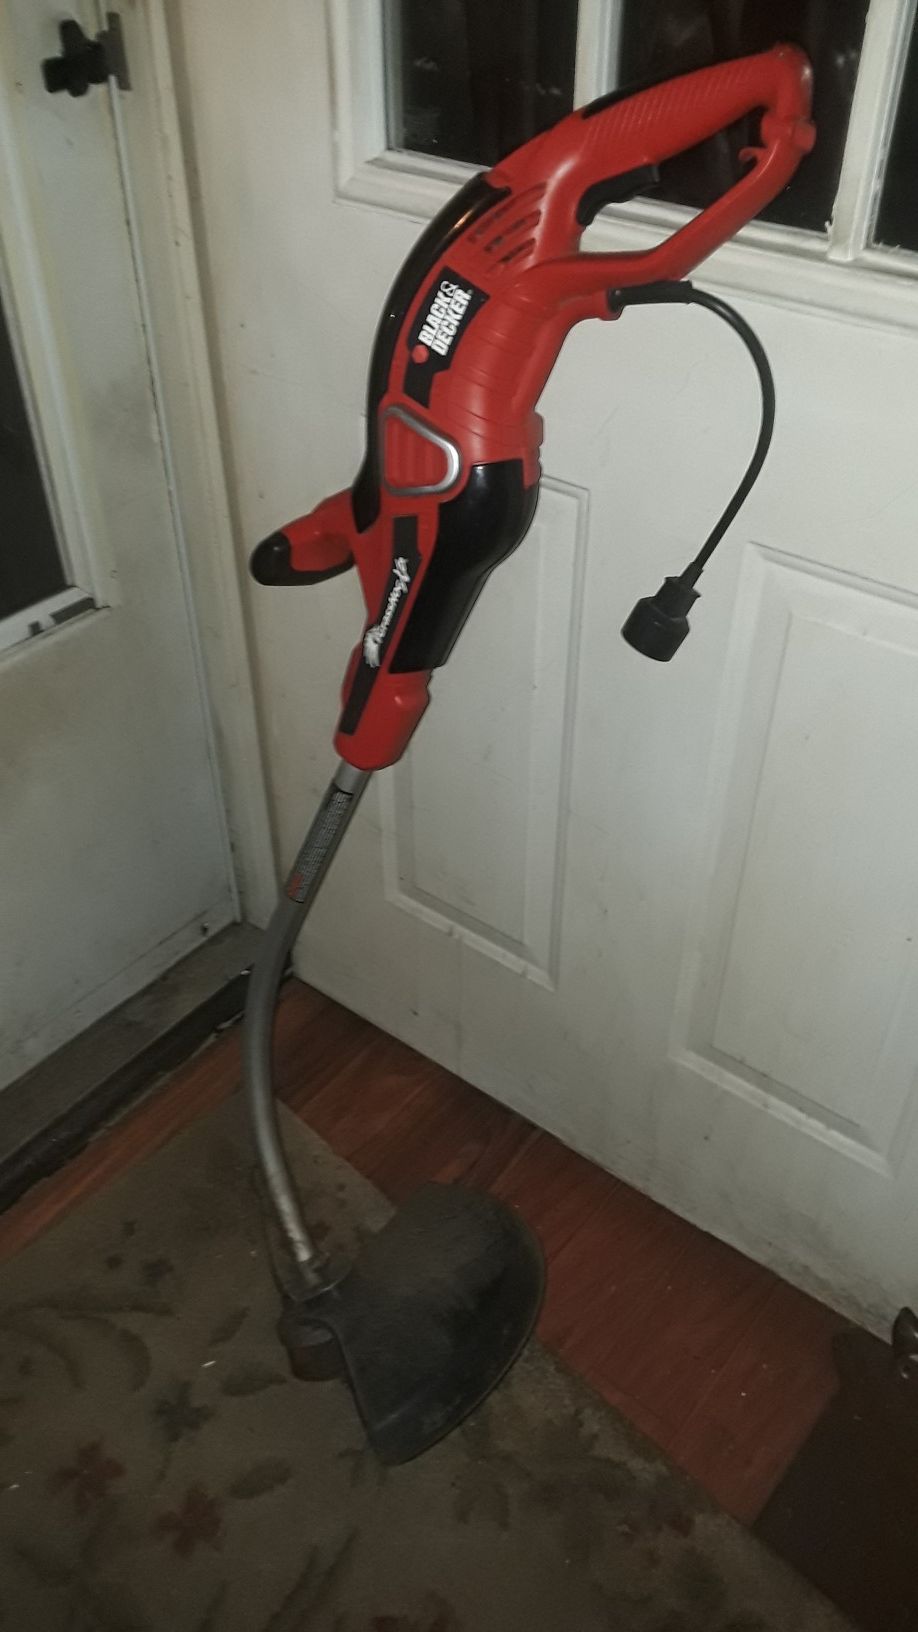 14" cut Black and decker Electric weed eater